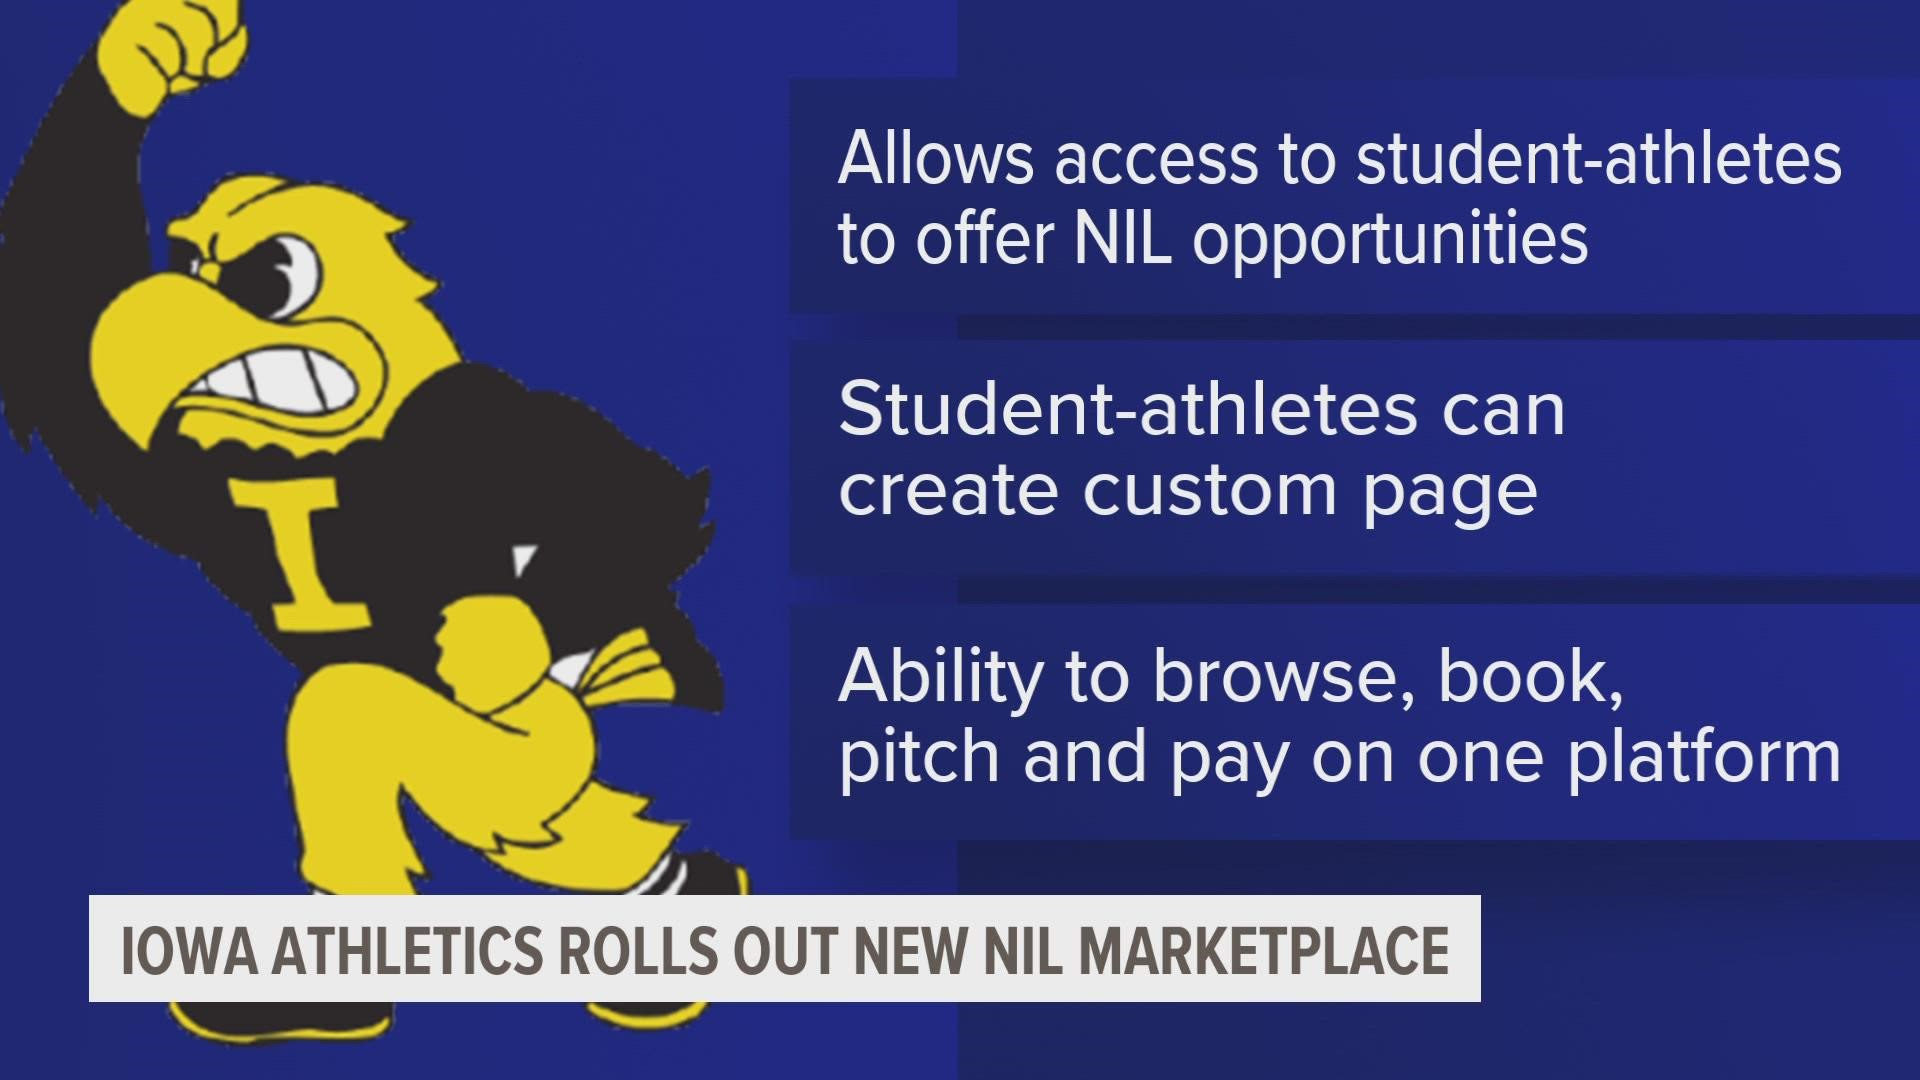 On this platform, student athletes can create their own page where fans, brands and sponsors can book, pitch and pay them for NIL activities.